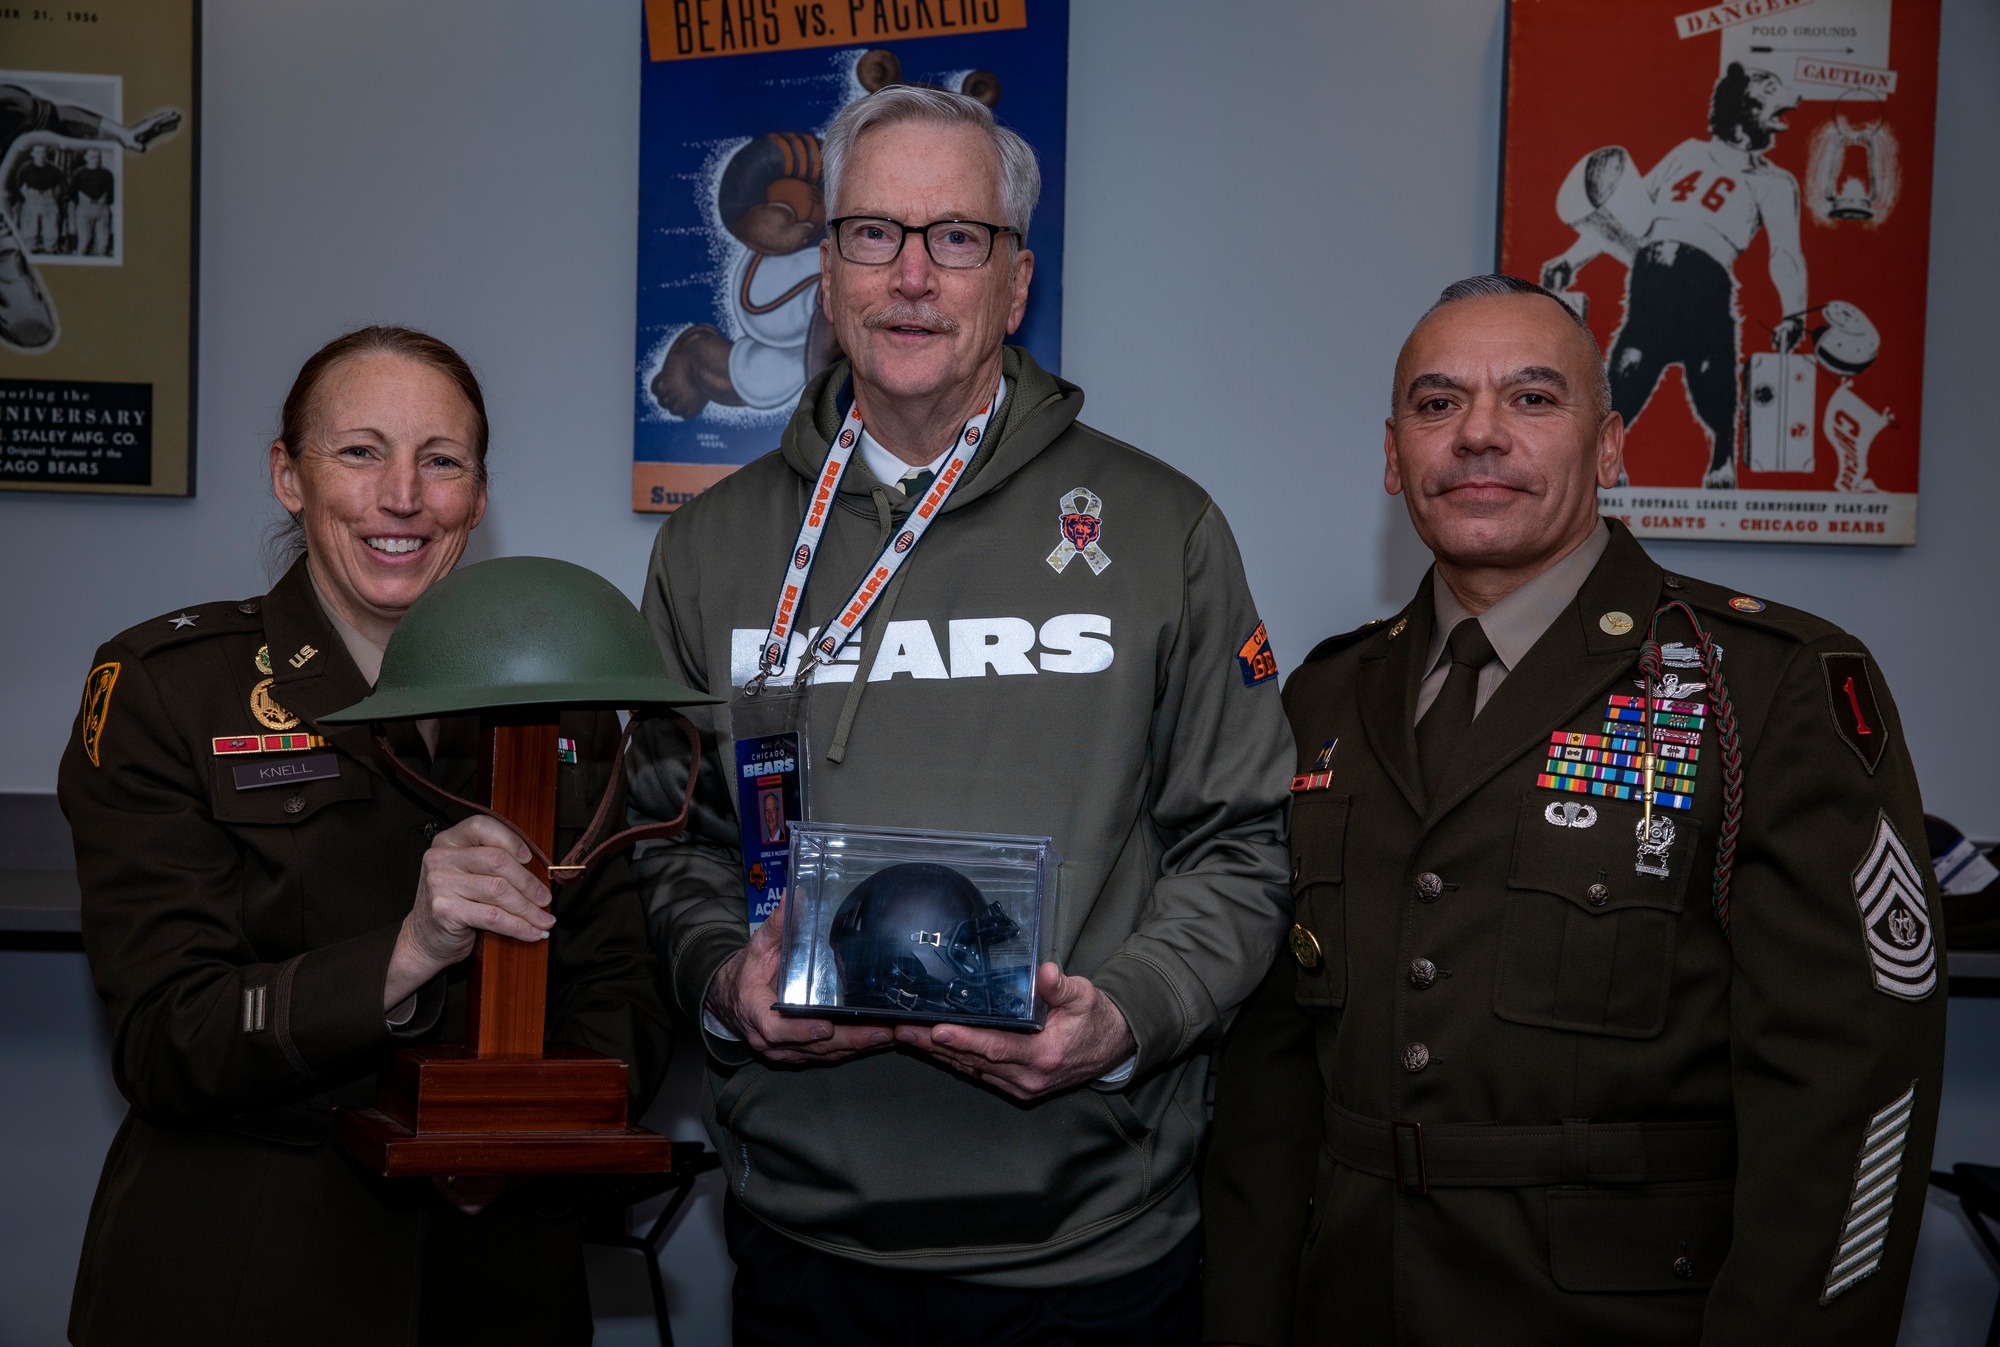 DVIDS - Images - Big Red One Soldiers Reenlist at Chicago Bears